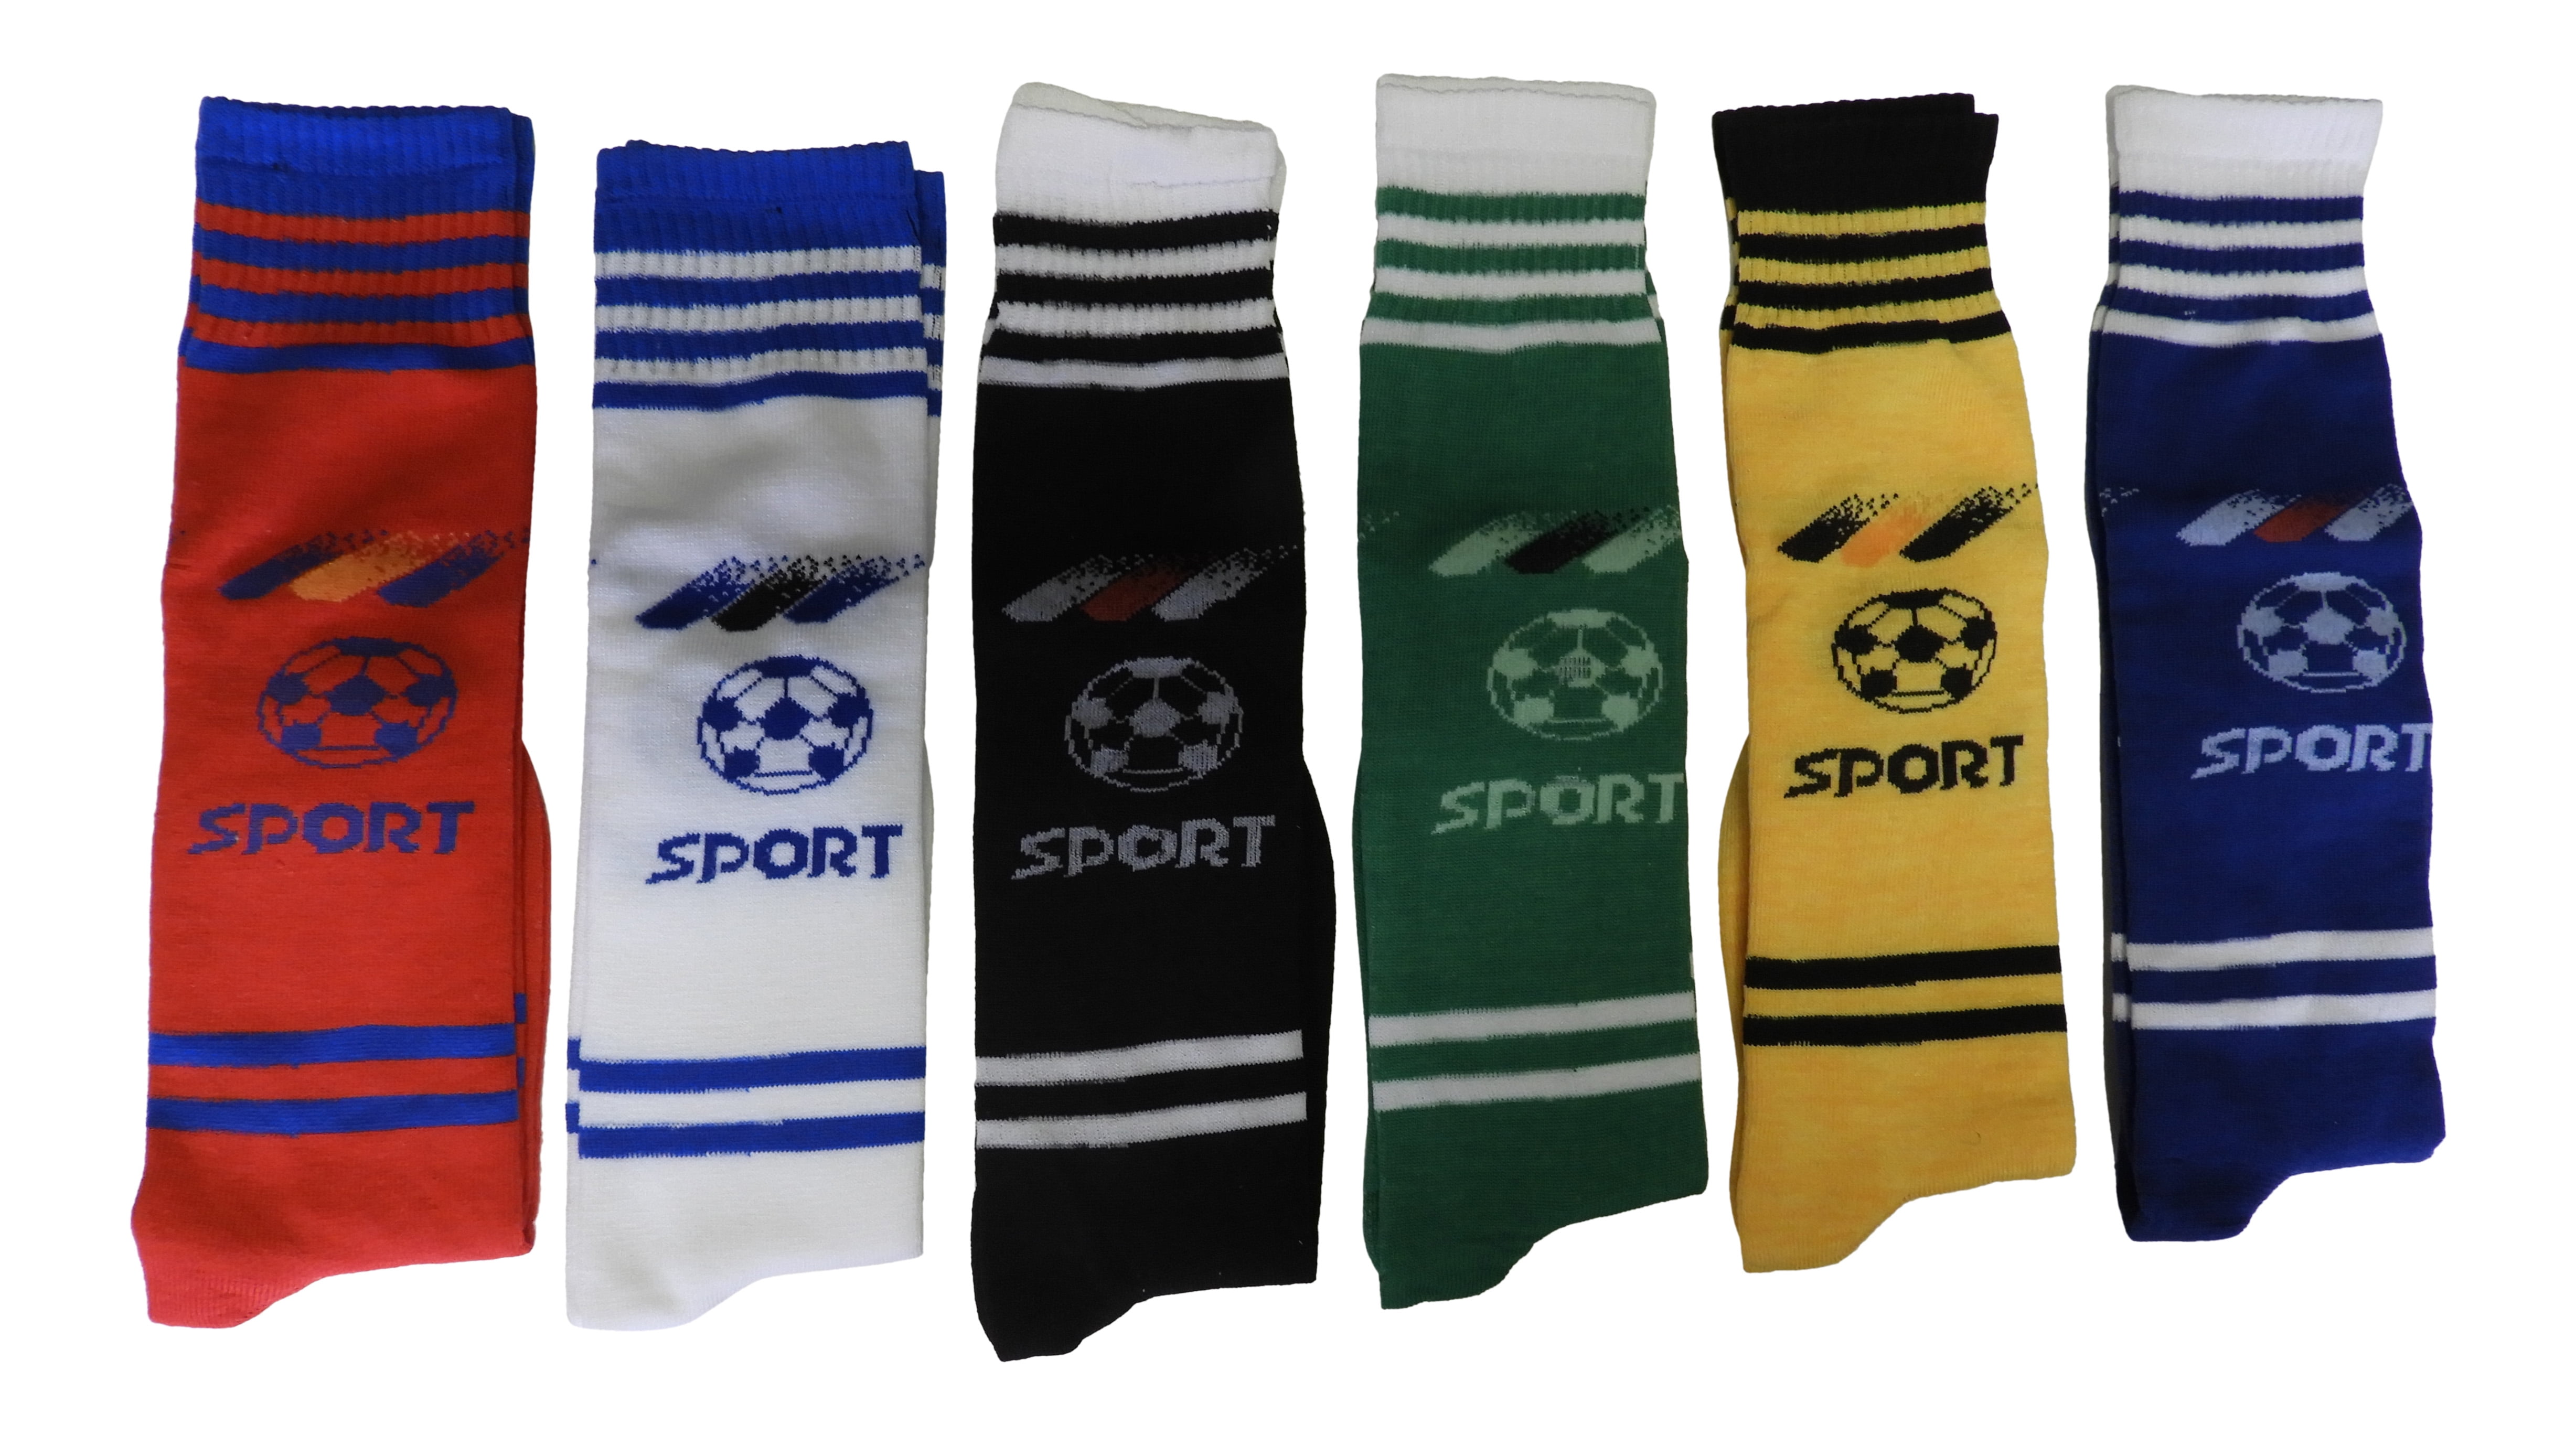 Unisex Adult Player Fans Athletic Sport Crew Soccer Socks With Cushion For Men Women 